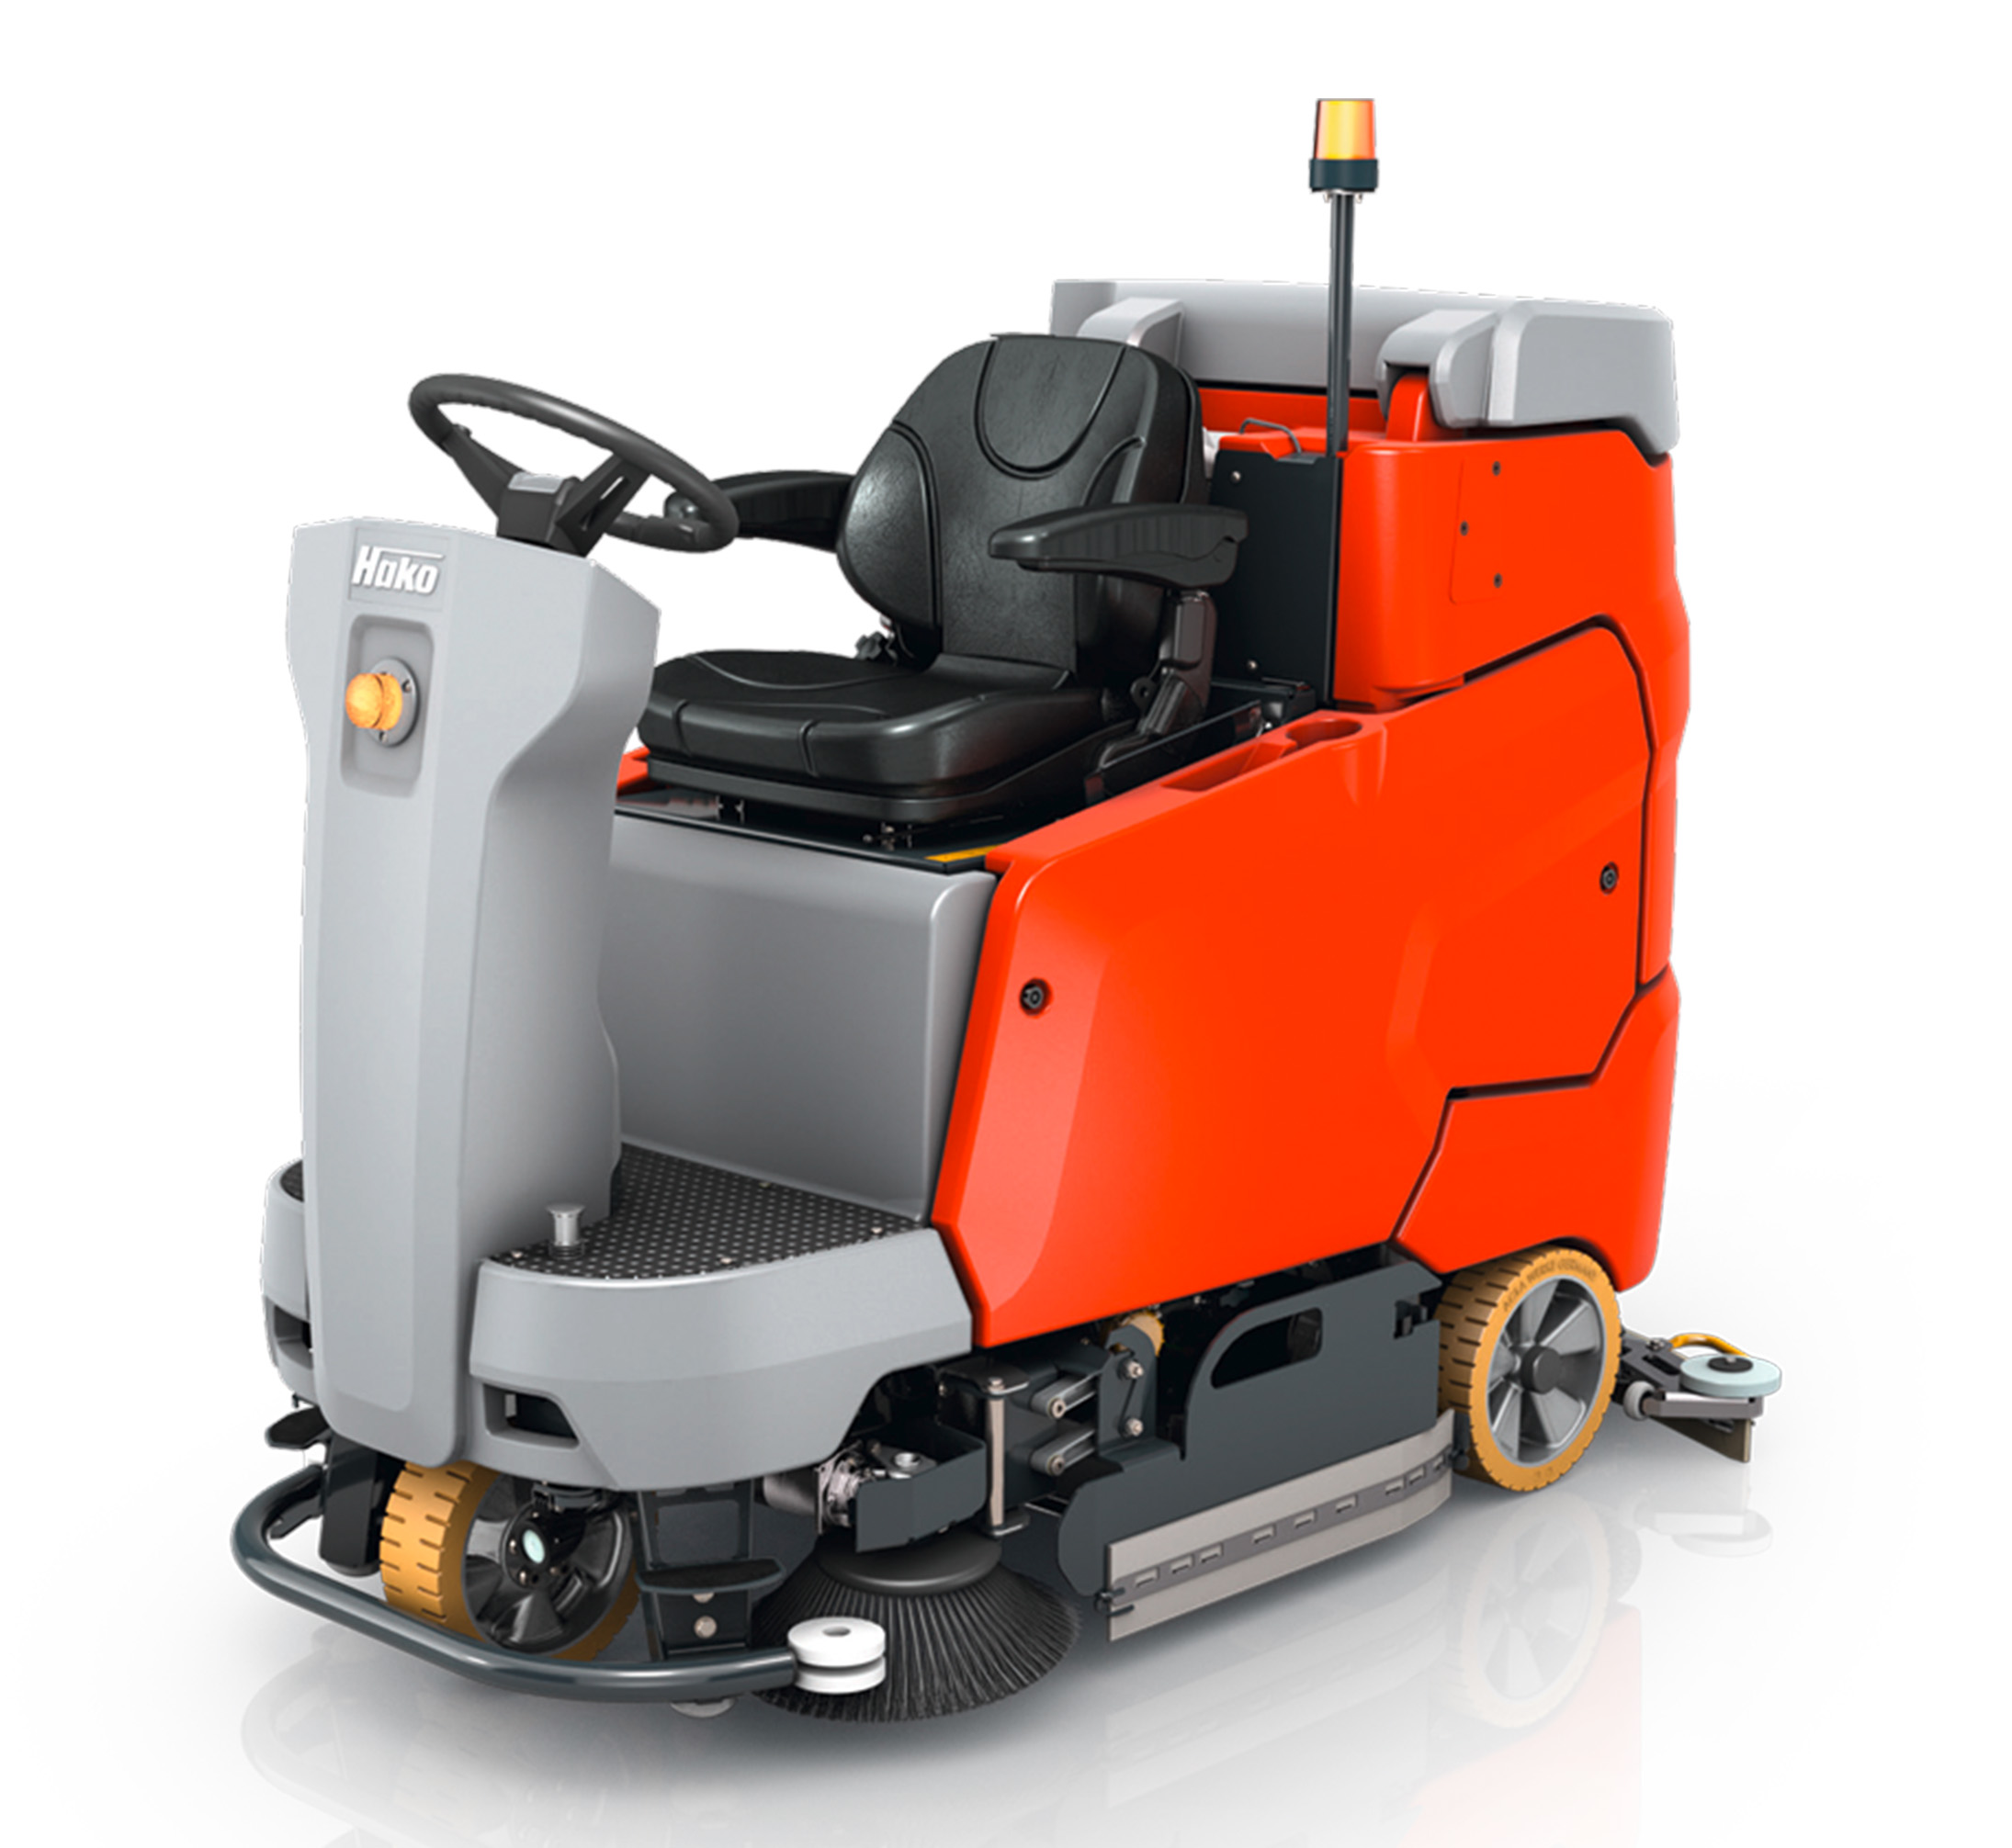 cleaning machine/sweeper/scrubber drier. Hako Angle support Hako part no: 00968460 